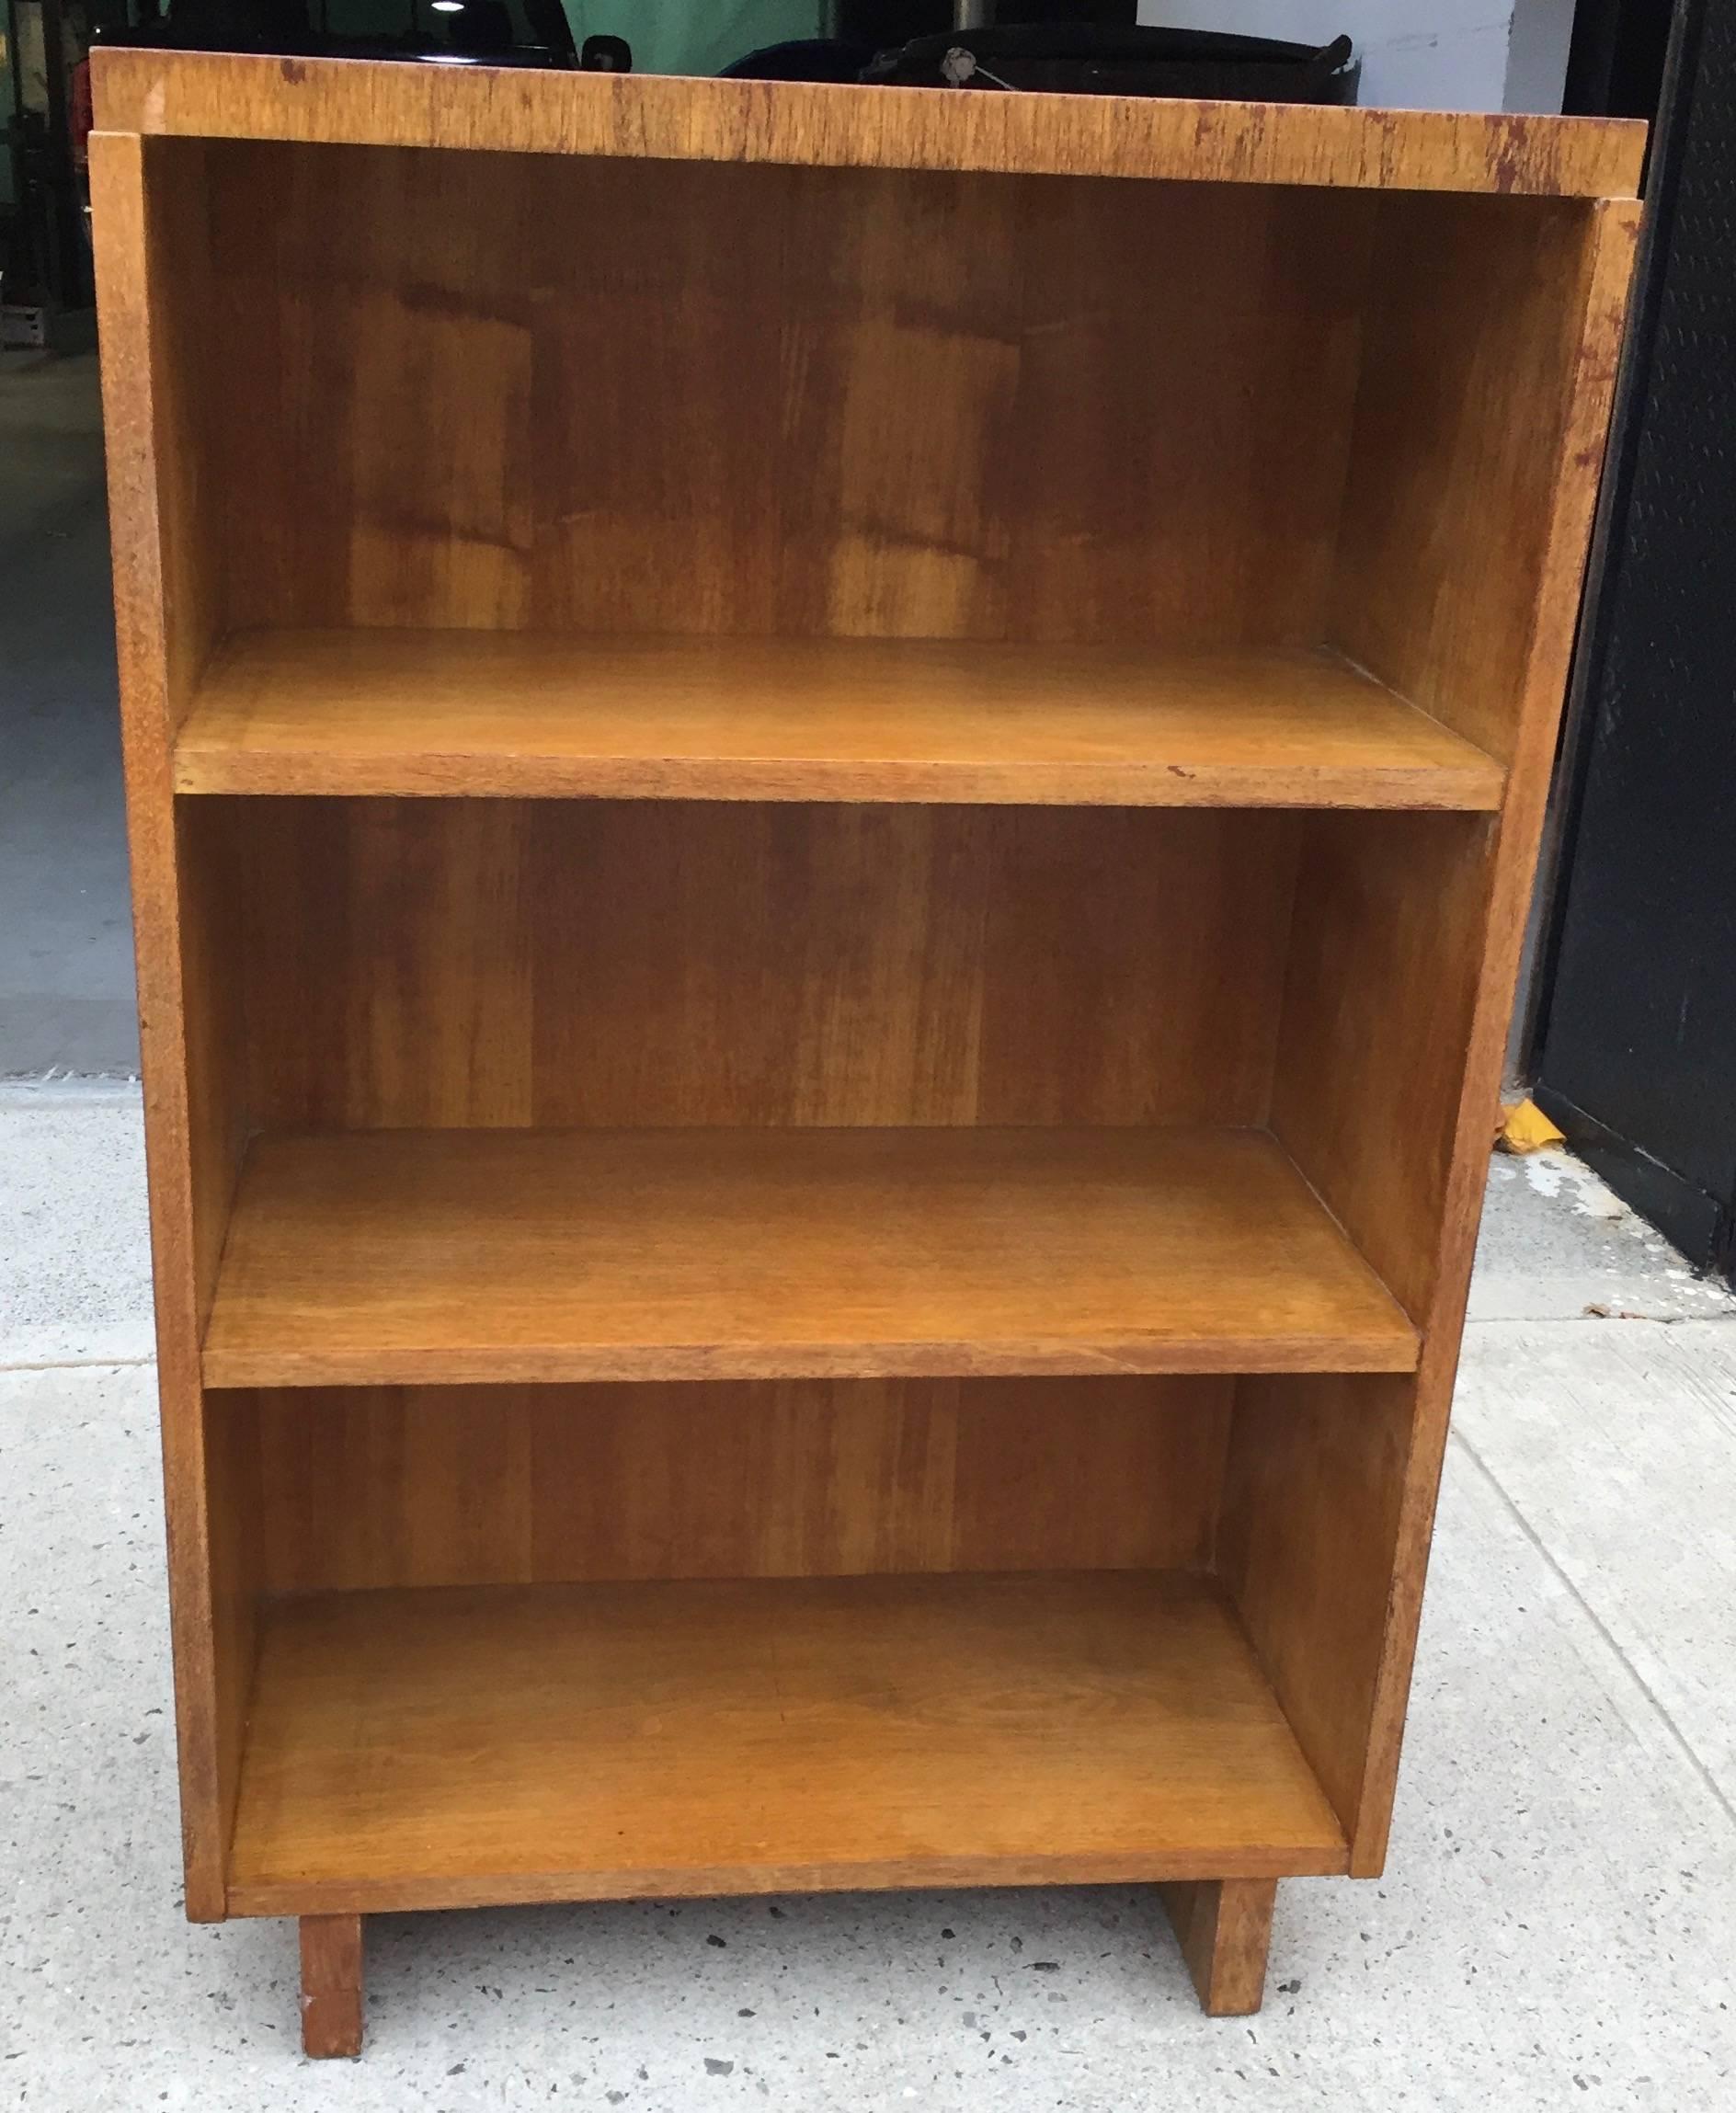 Simple modernist three-shelf bookcase on sleigh legs with lovely striped graining and light coursed surface. This unit is part of a custom designed library suite we acquired from the heirs of the family that hired Robsjohn-Gibbings in 1938 to